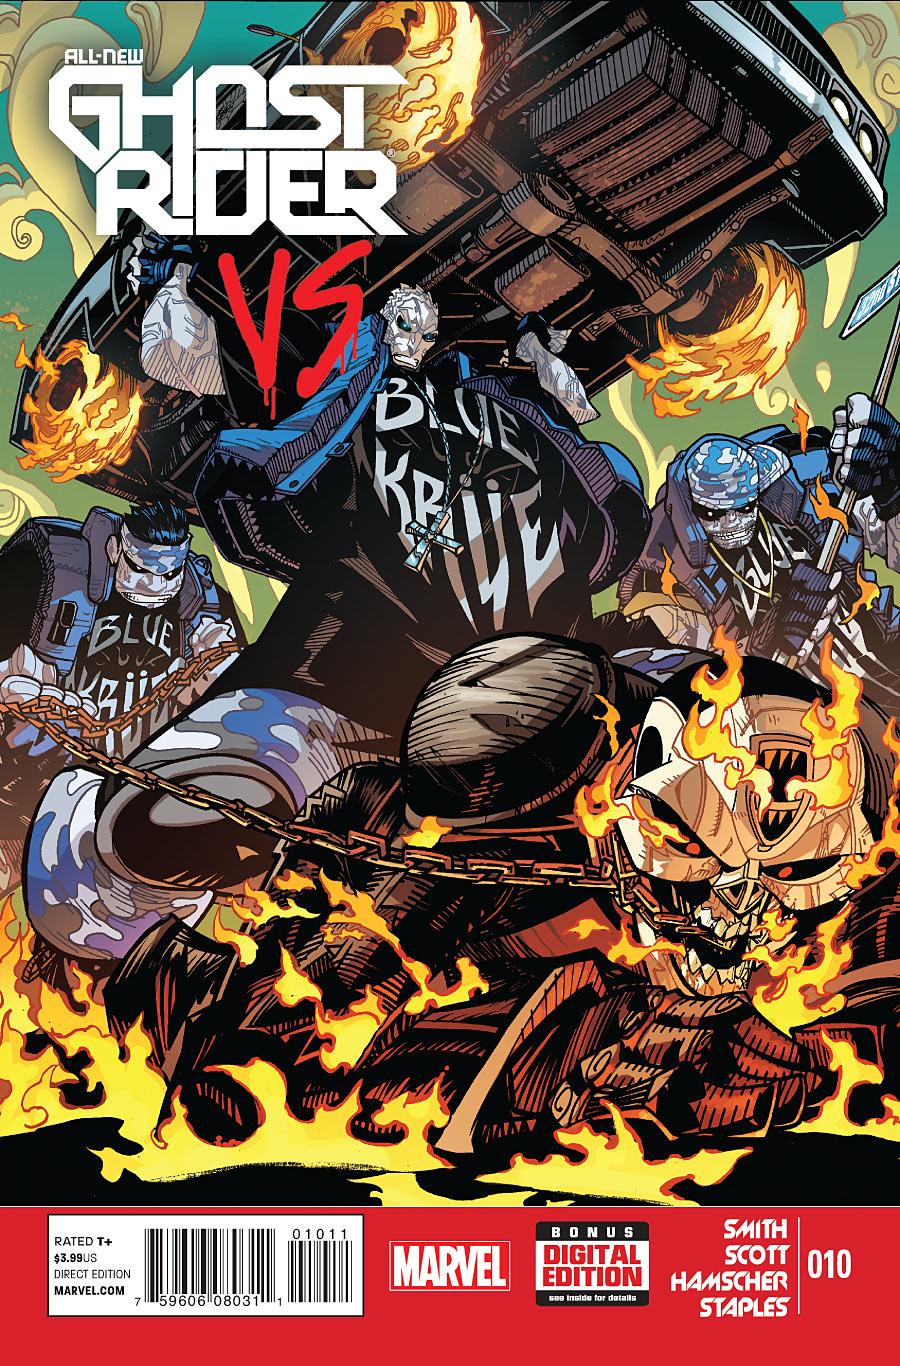 All-New Ghost Rider Vol. 1 #10